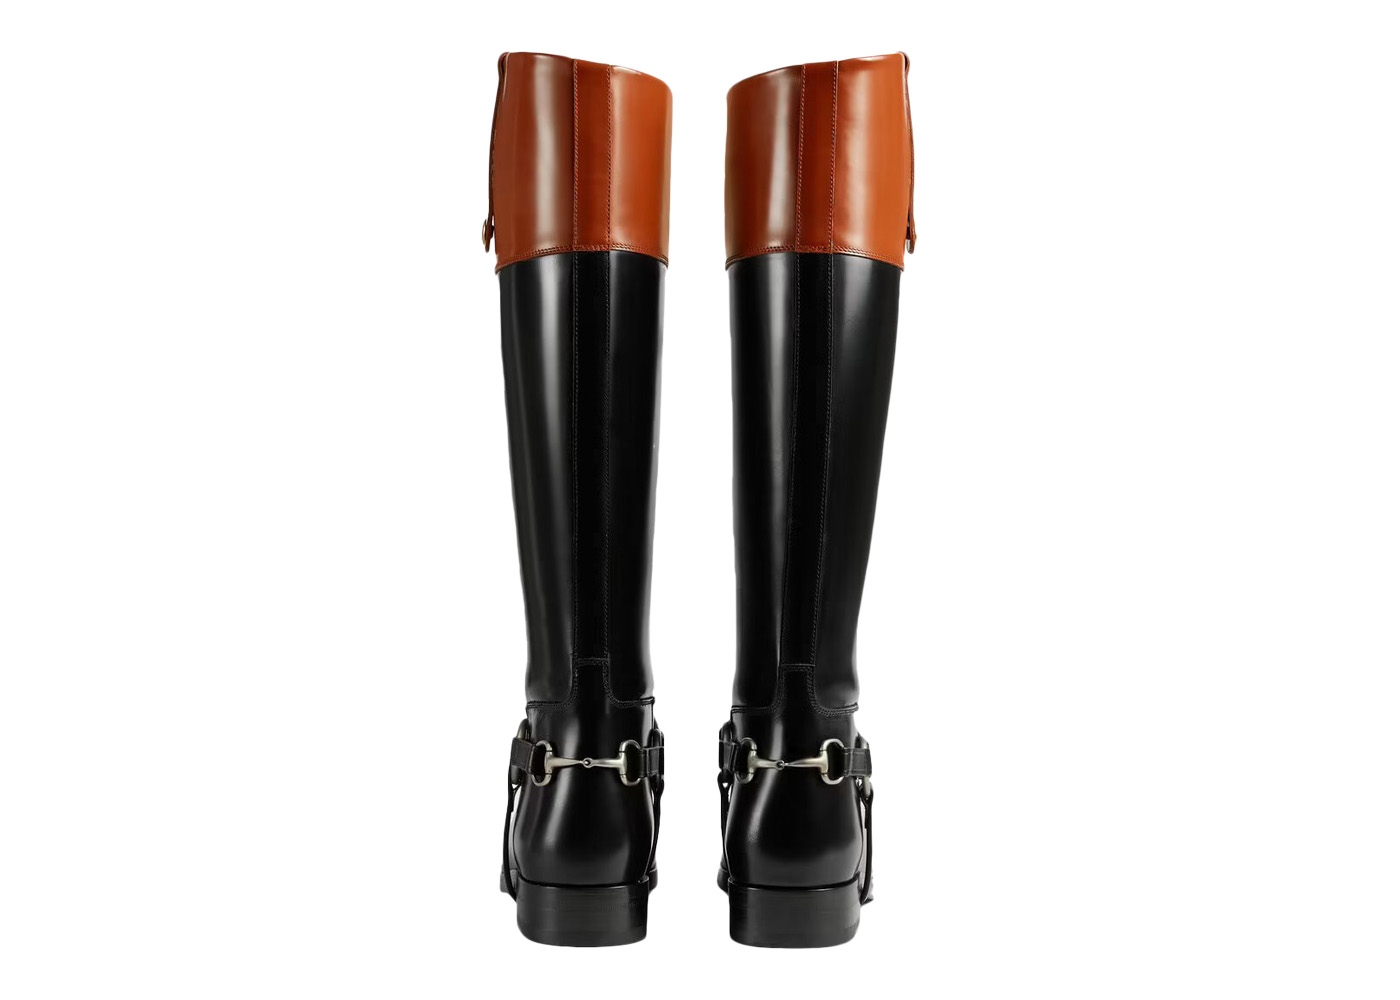 adidas x Gucci 73mm Knee-High Boots Cognac Leather